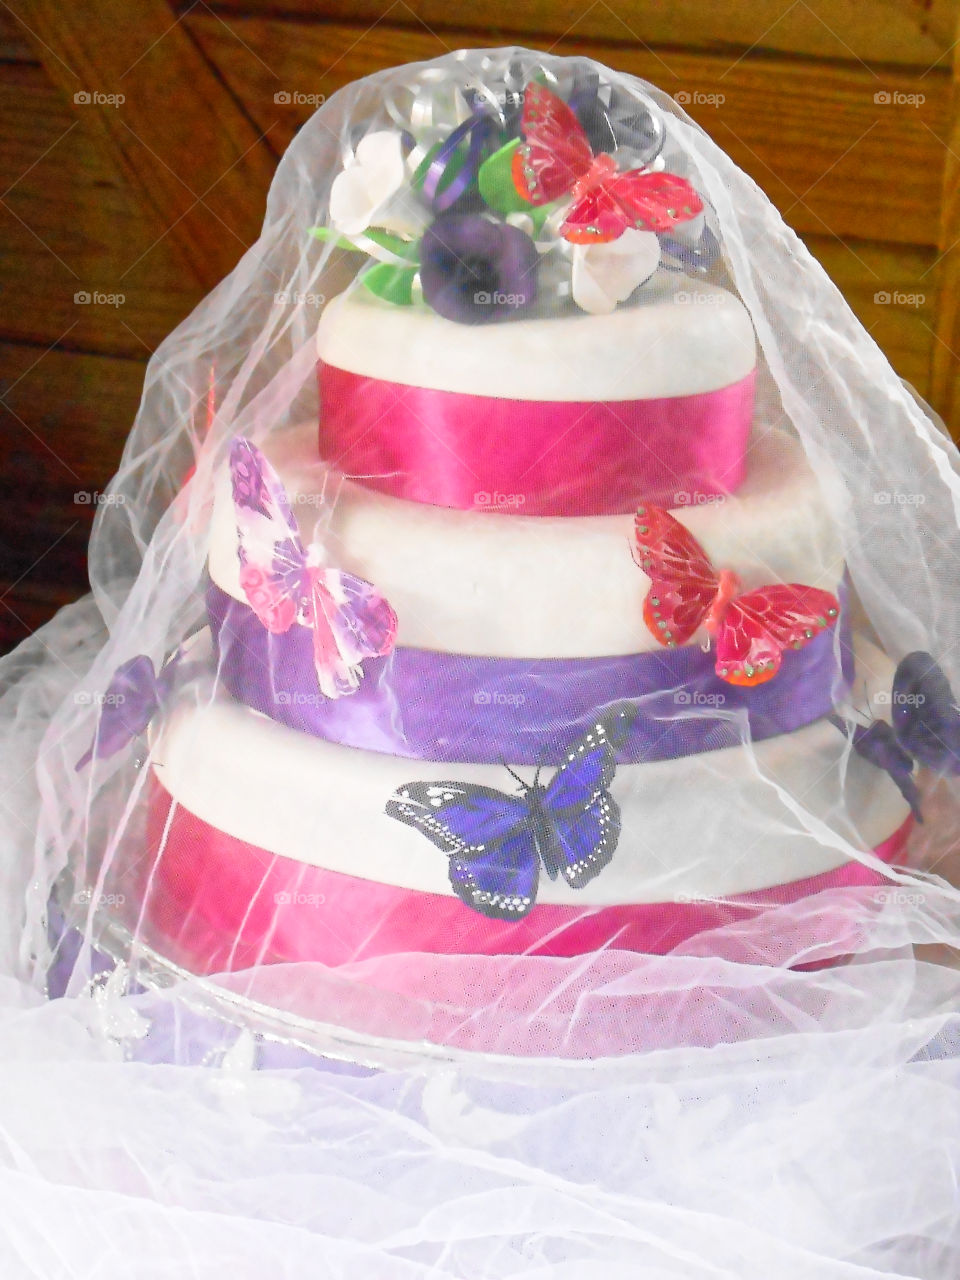 Three Tier Cake Decorated with Butterflies